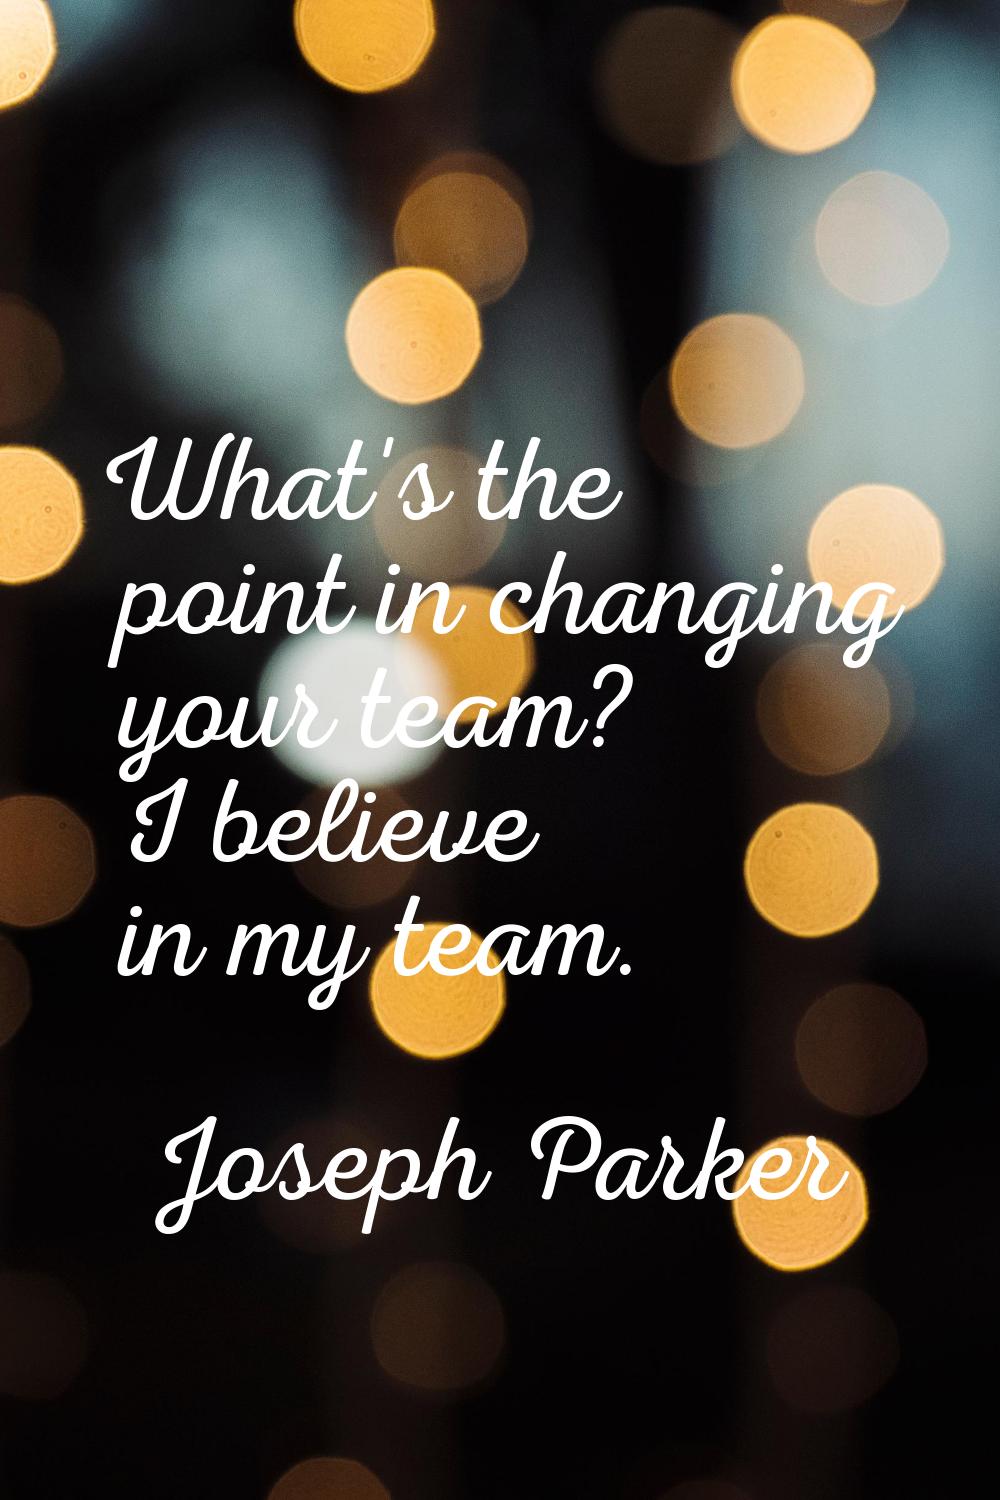 What's the point in changing your team? I believe in my team.